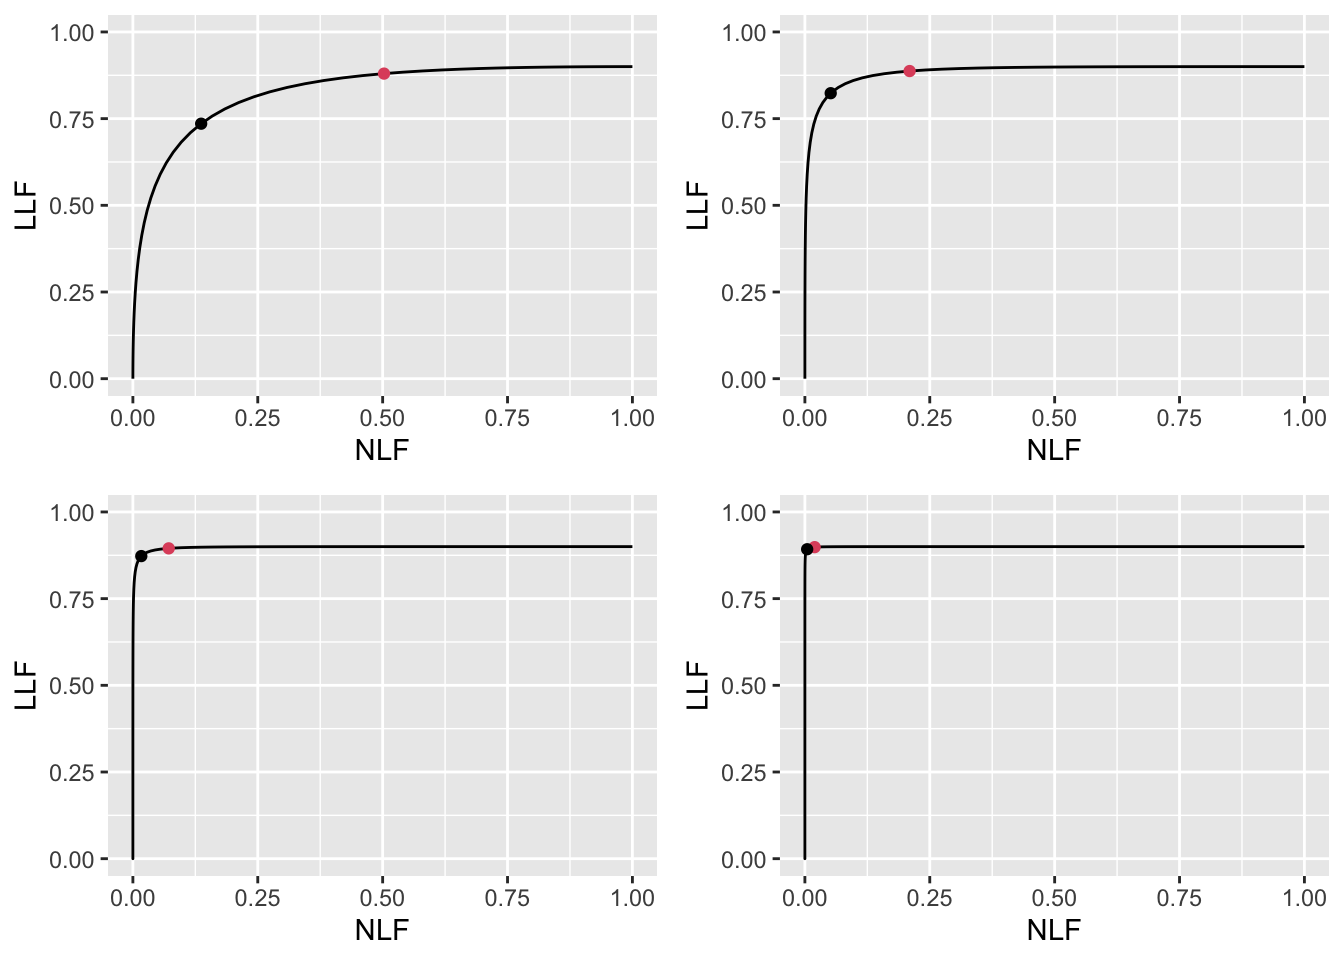 High performance varying $\mu$ FROC plots with superimposed operating points. The red dot corresponds to $\text{wAFROC}_\text{AUC}$ optimization and the black dot to Youden-index optimization. The values of $\mu$ are: top-left $\mu = 2$, top-right $\mu = 3$, bottom-left $\mu = 4$ and bottom-right $\mu = 5$.